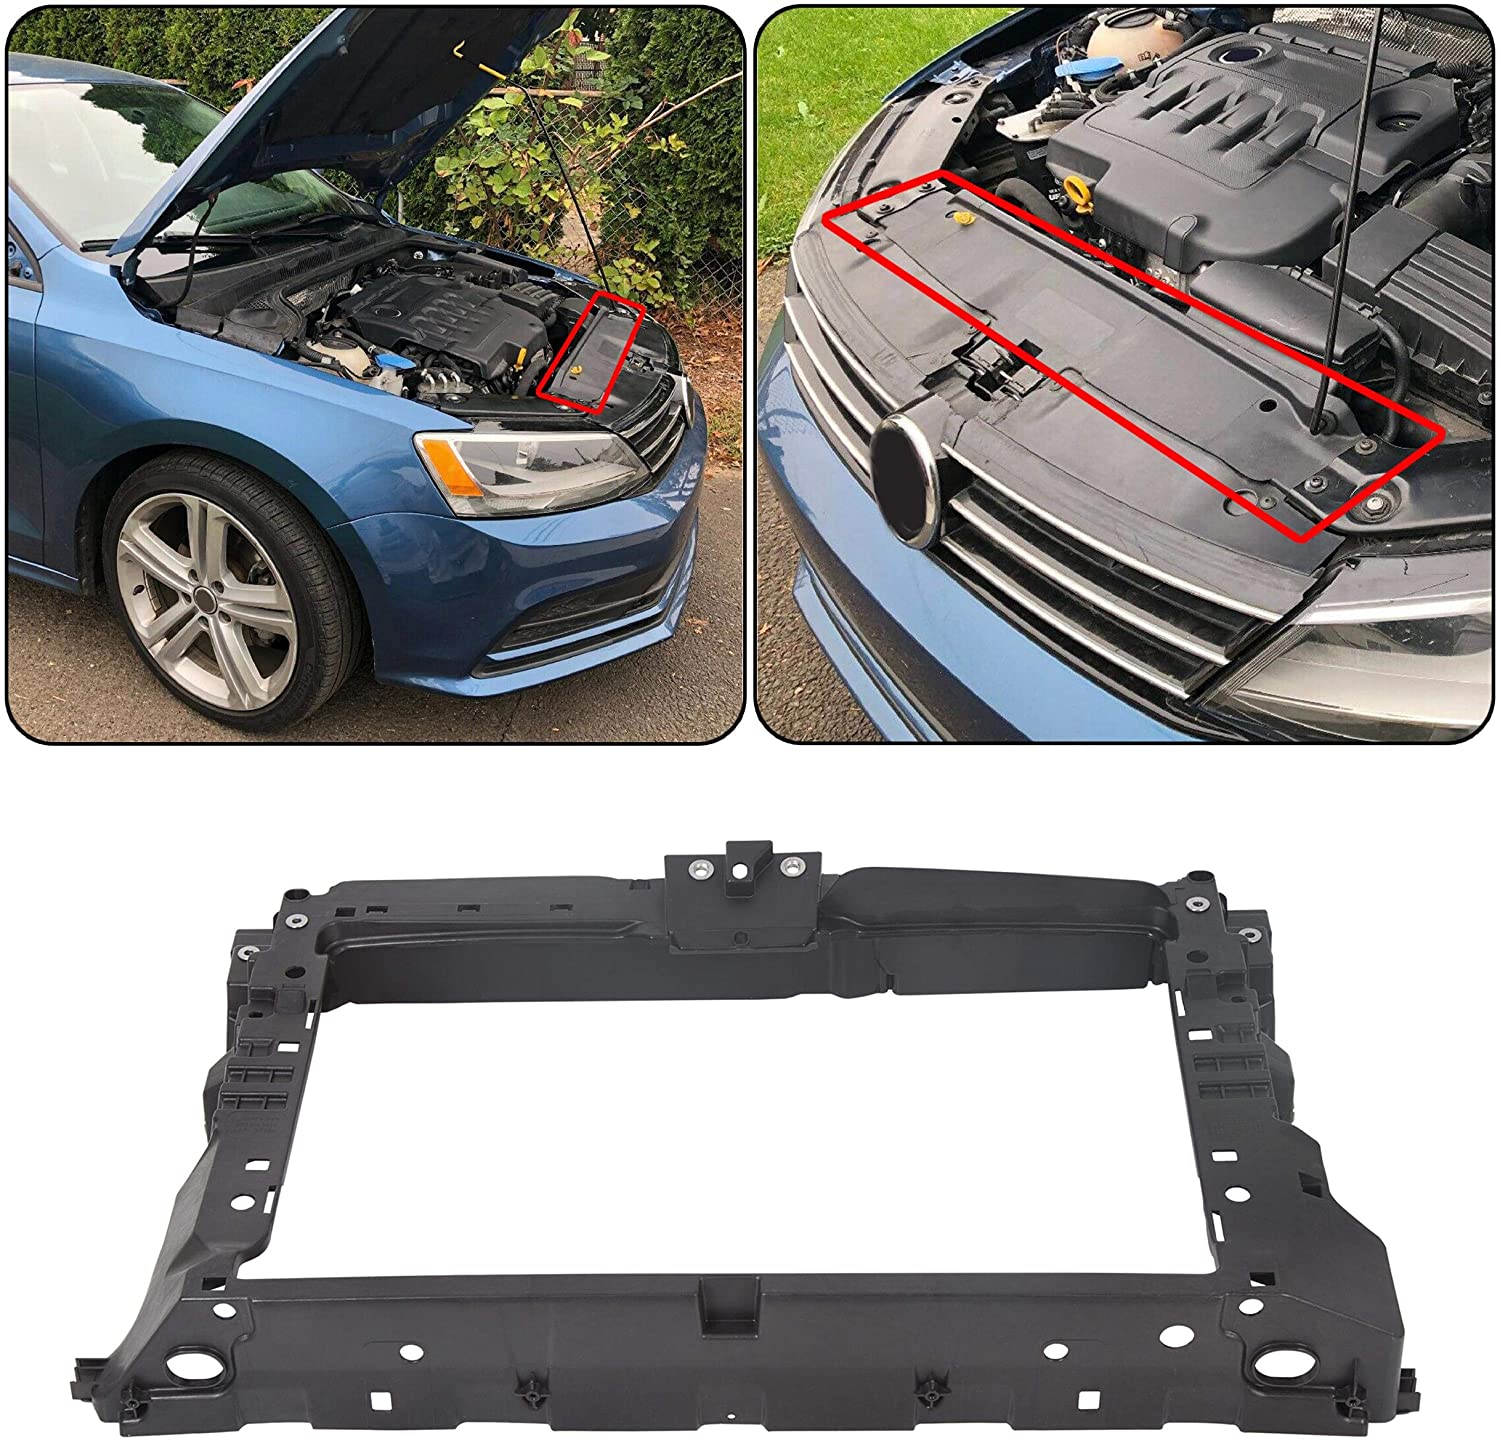 HECASA Front Center Radiator Support Assembly Fits 2011-2018 Volkswagen Jetta Replacement for Part #5C6805588R VW1225135